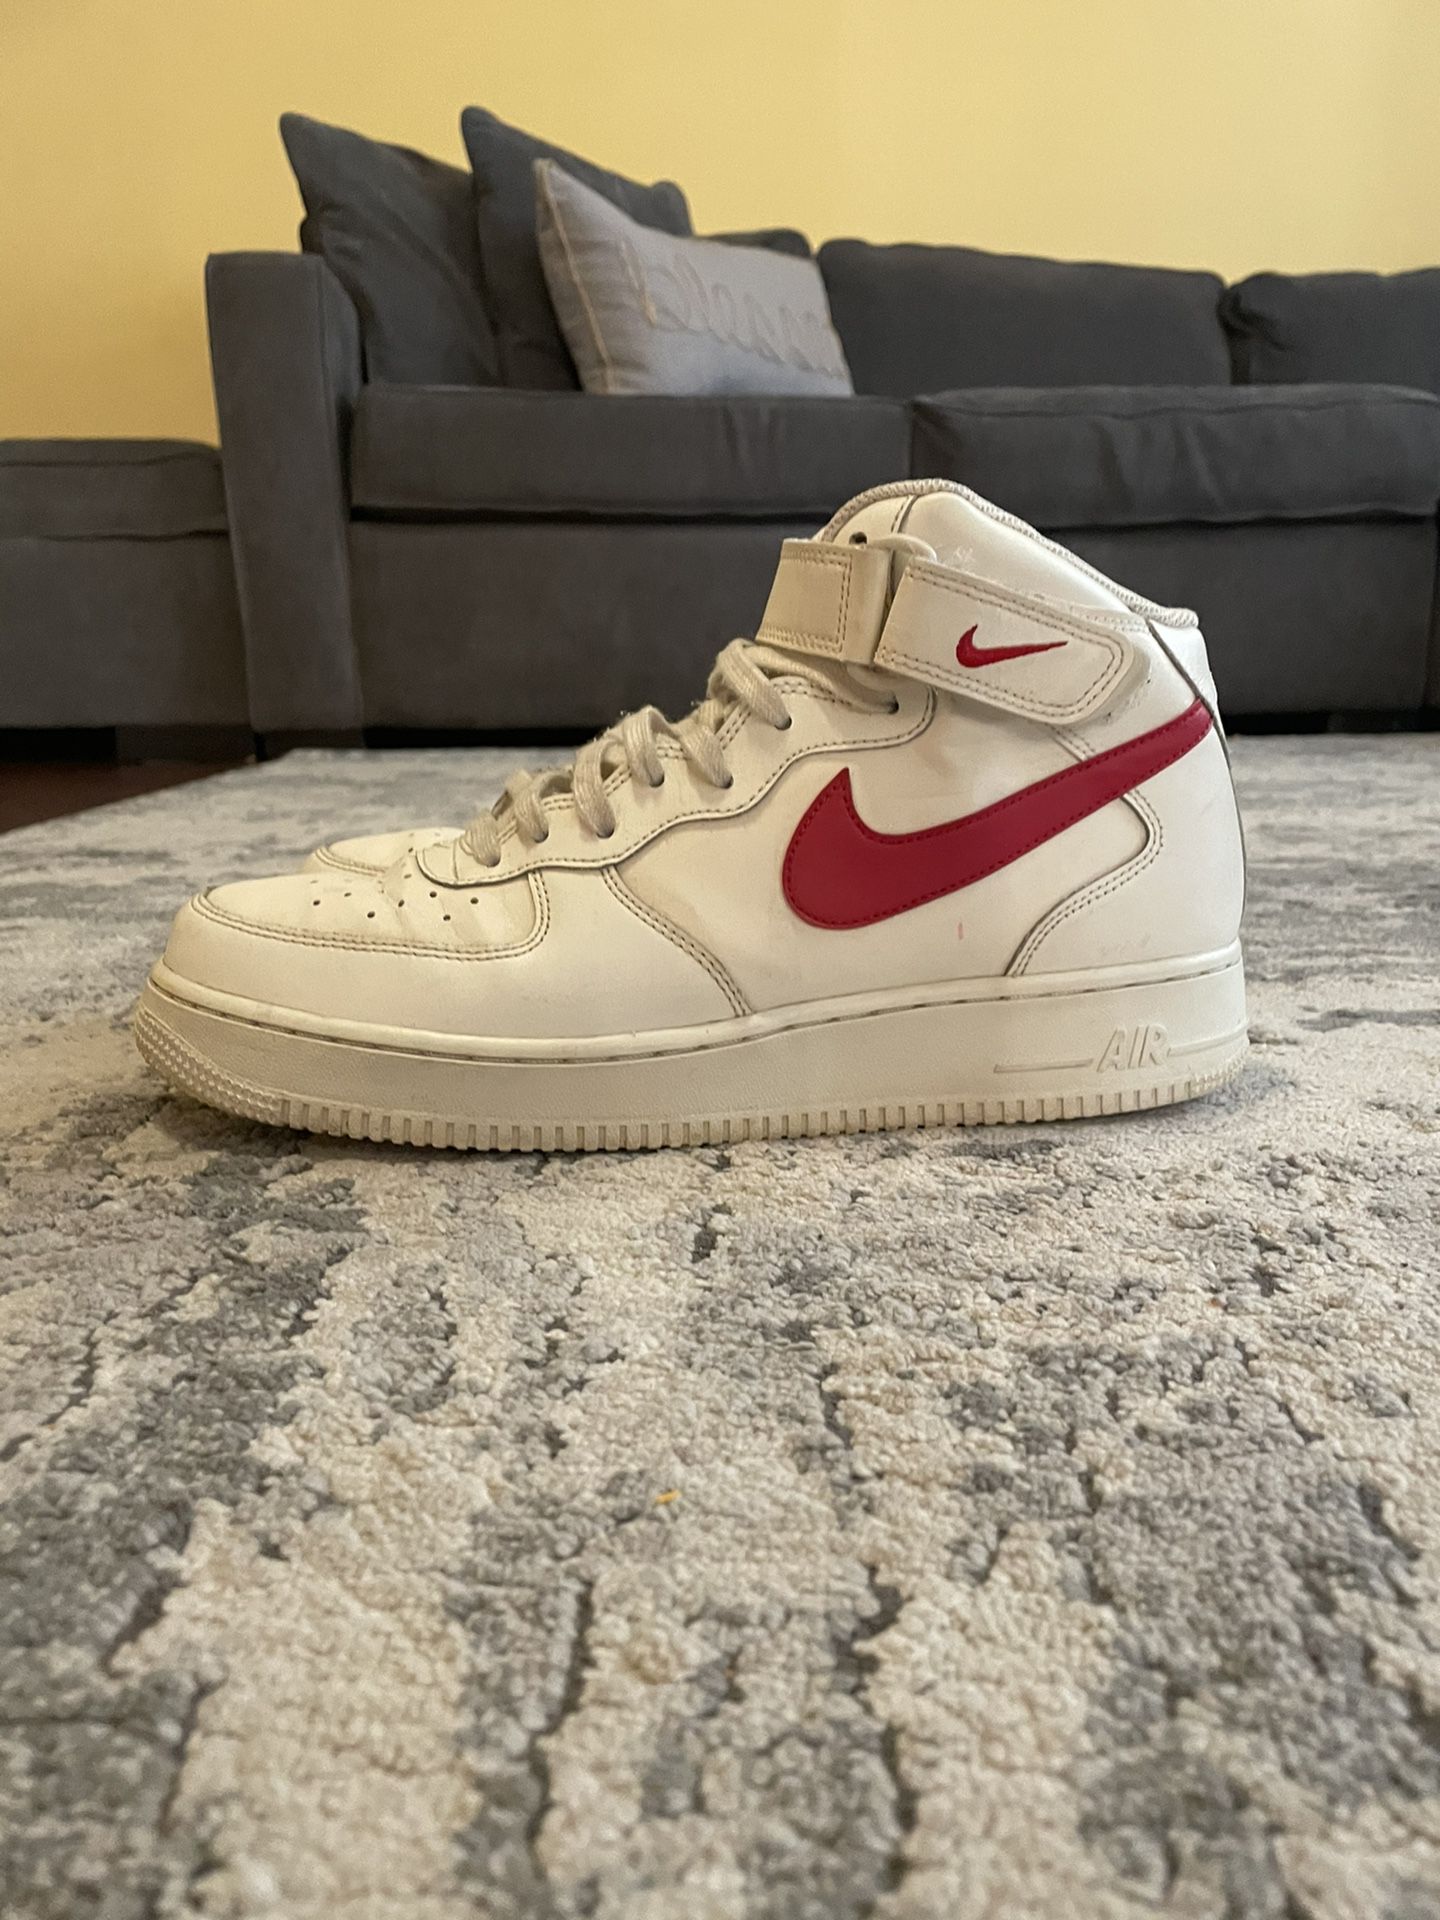 Nike Air Force 1 Mid Size 10 Red Swoosh for Sale in Houston, TX